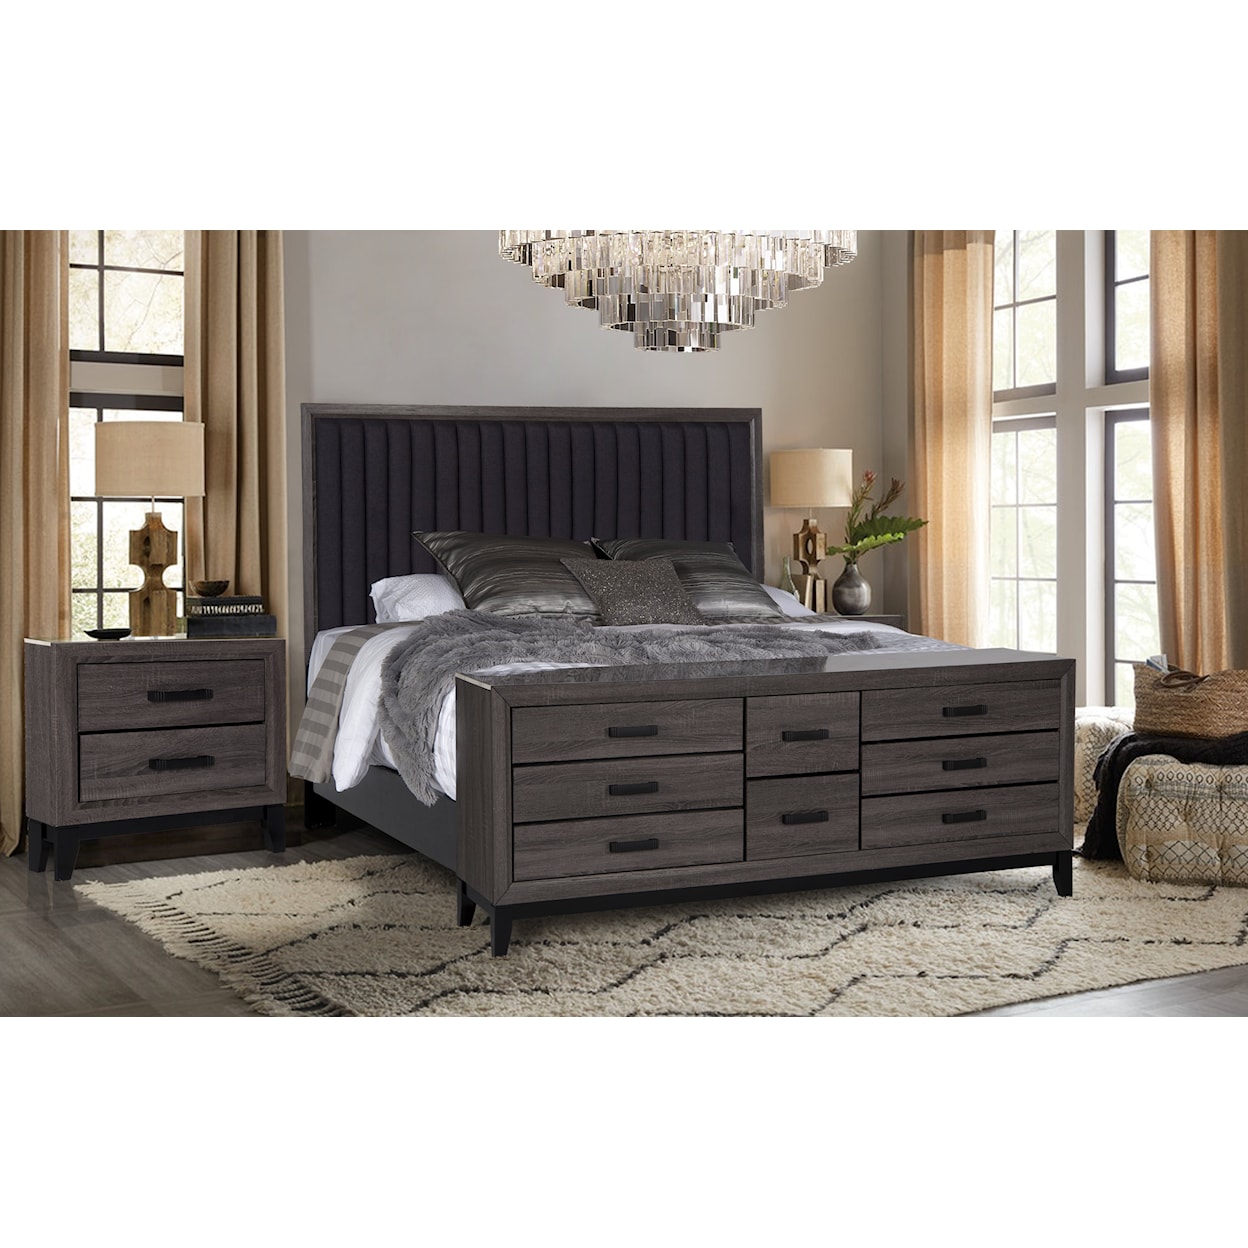 Global Furniture LAURA Full Bed with Storage